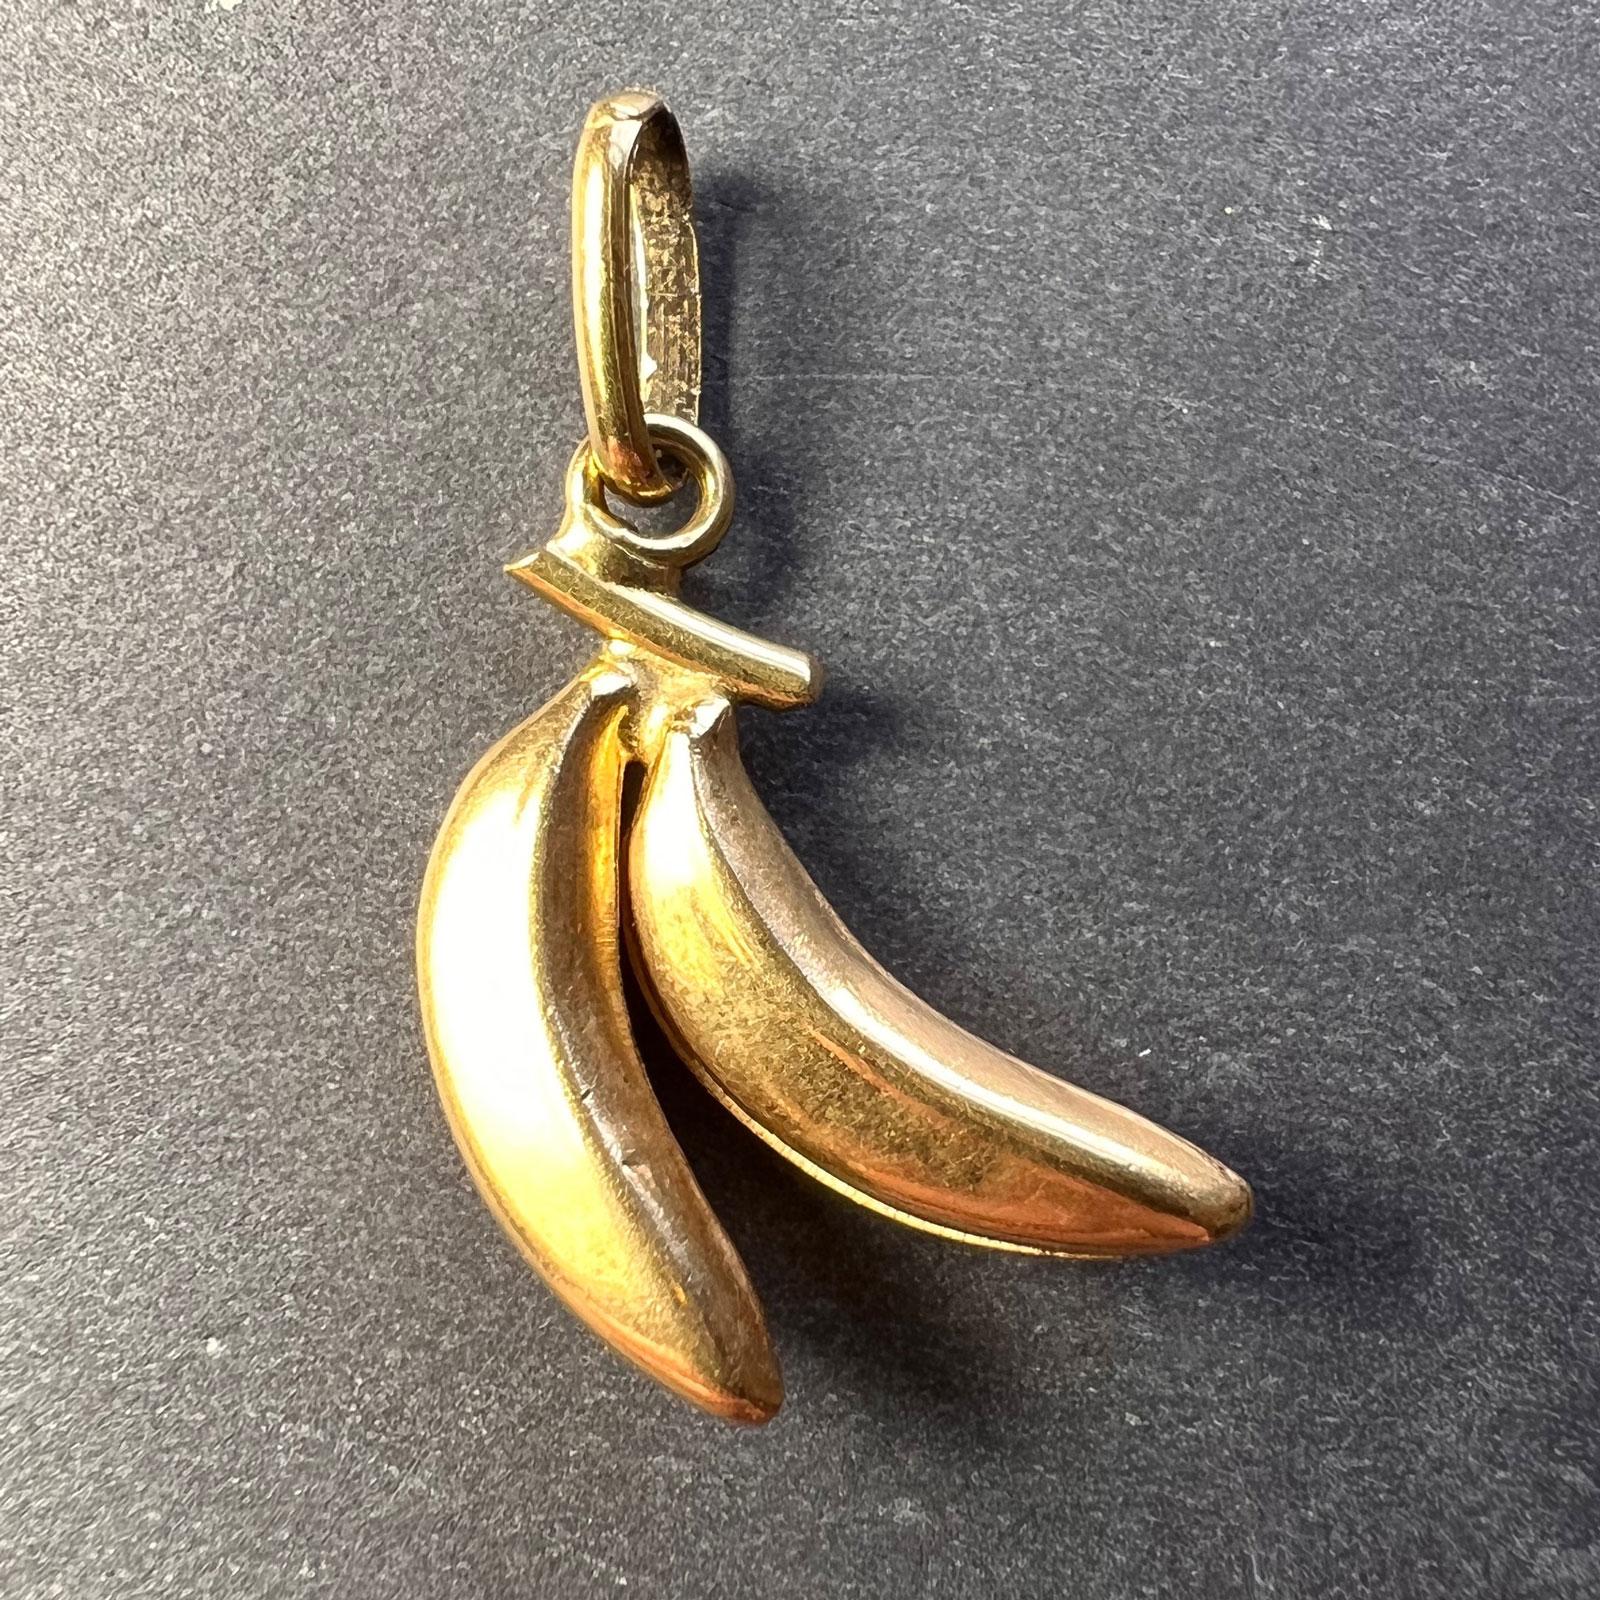 An 18 karat (18K) yellow gold fruit charm pendant designed as a bunch of bananas. Unmarked but tested as 18 karat gold.
 
Dimensions: 2 x 1.5 x 0.4 cm (not including jump ring)
Weight: 1.78 grams
 
